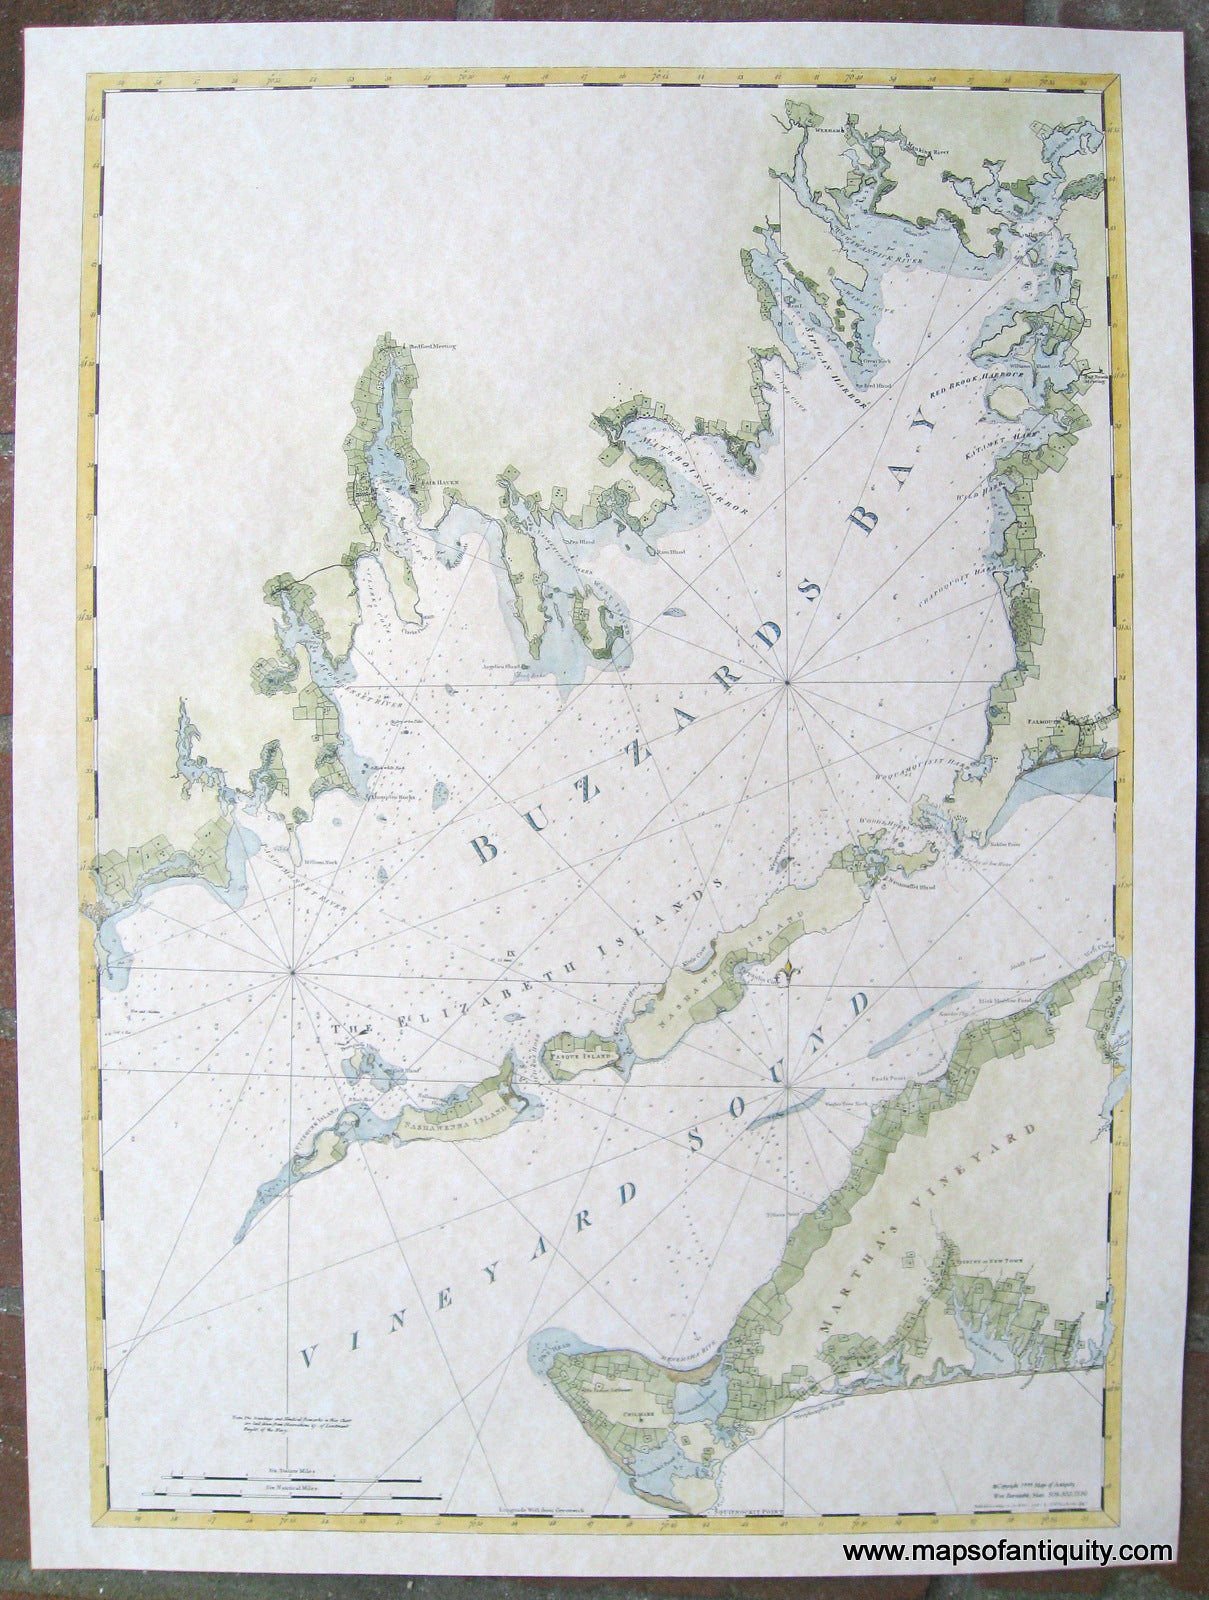 Reproduction-Map-Buzzards-Bay-portion-of-a-map-from-the-Atlantic-Neptune-1781-Des-Barres